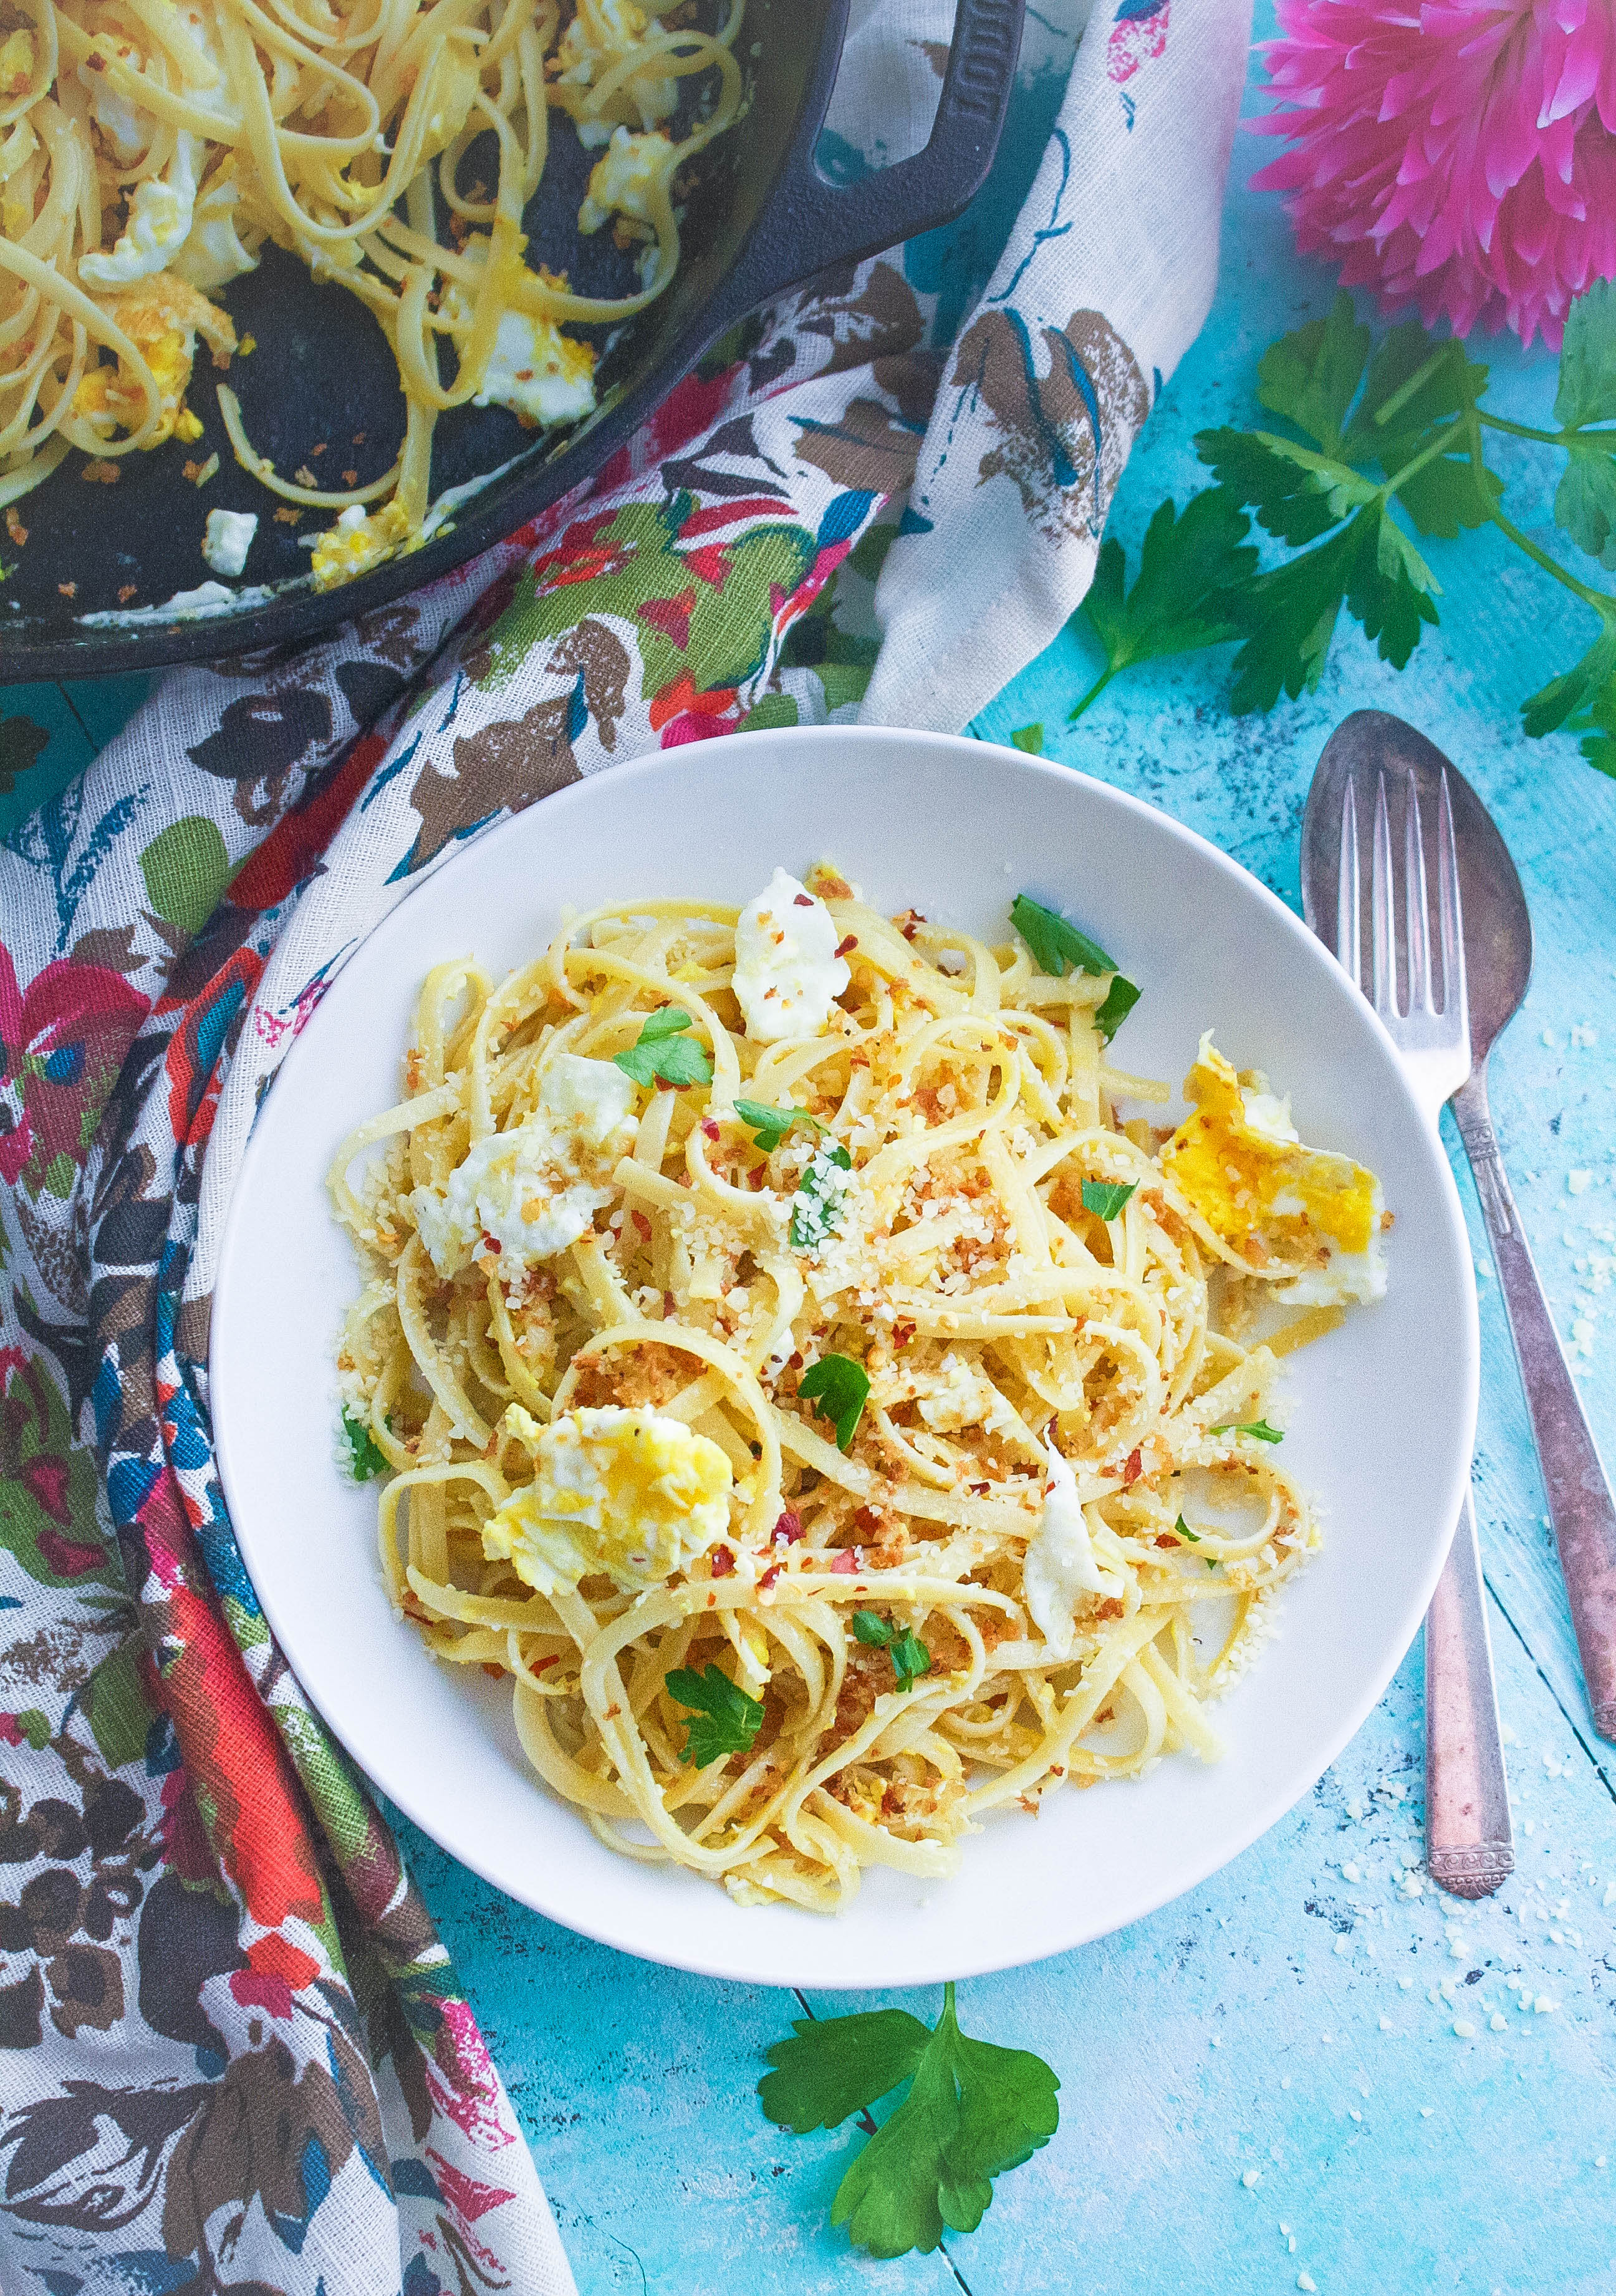 Spaghetti with Fried Eggs and Crunchy Breadcrumbs is a delightful dish for when you're short on time. Spaghetti with Fried Eggs and Crunchy Breadcrumbs is a lovely meal any night of the week.